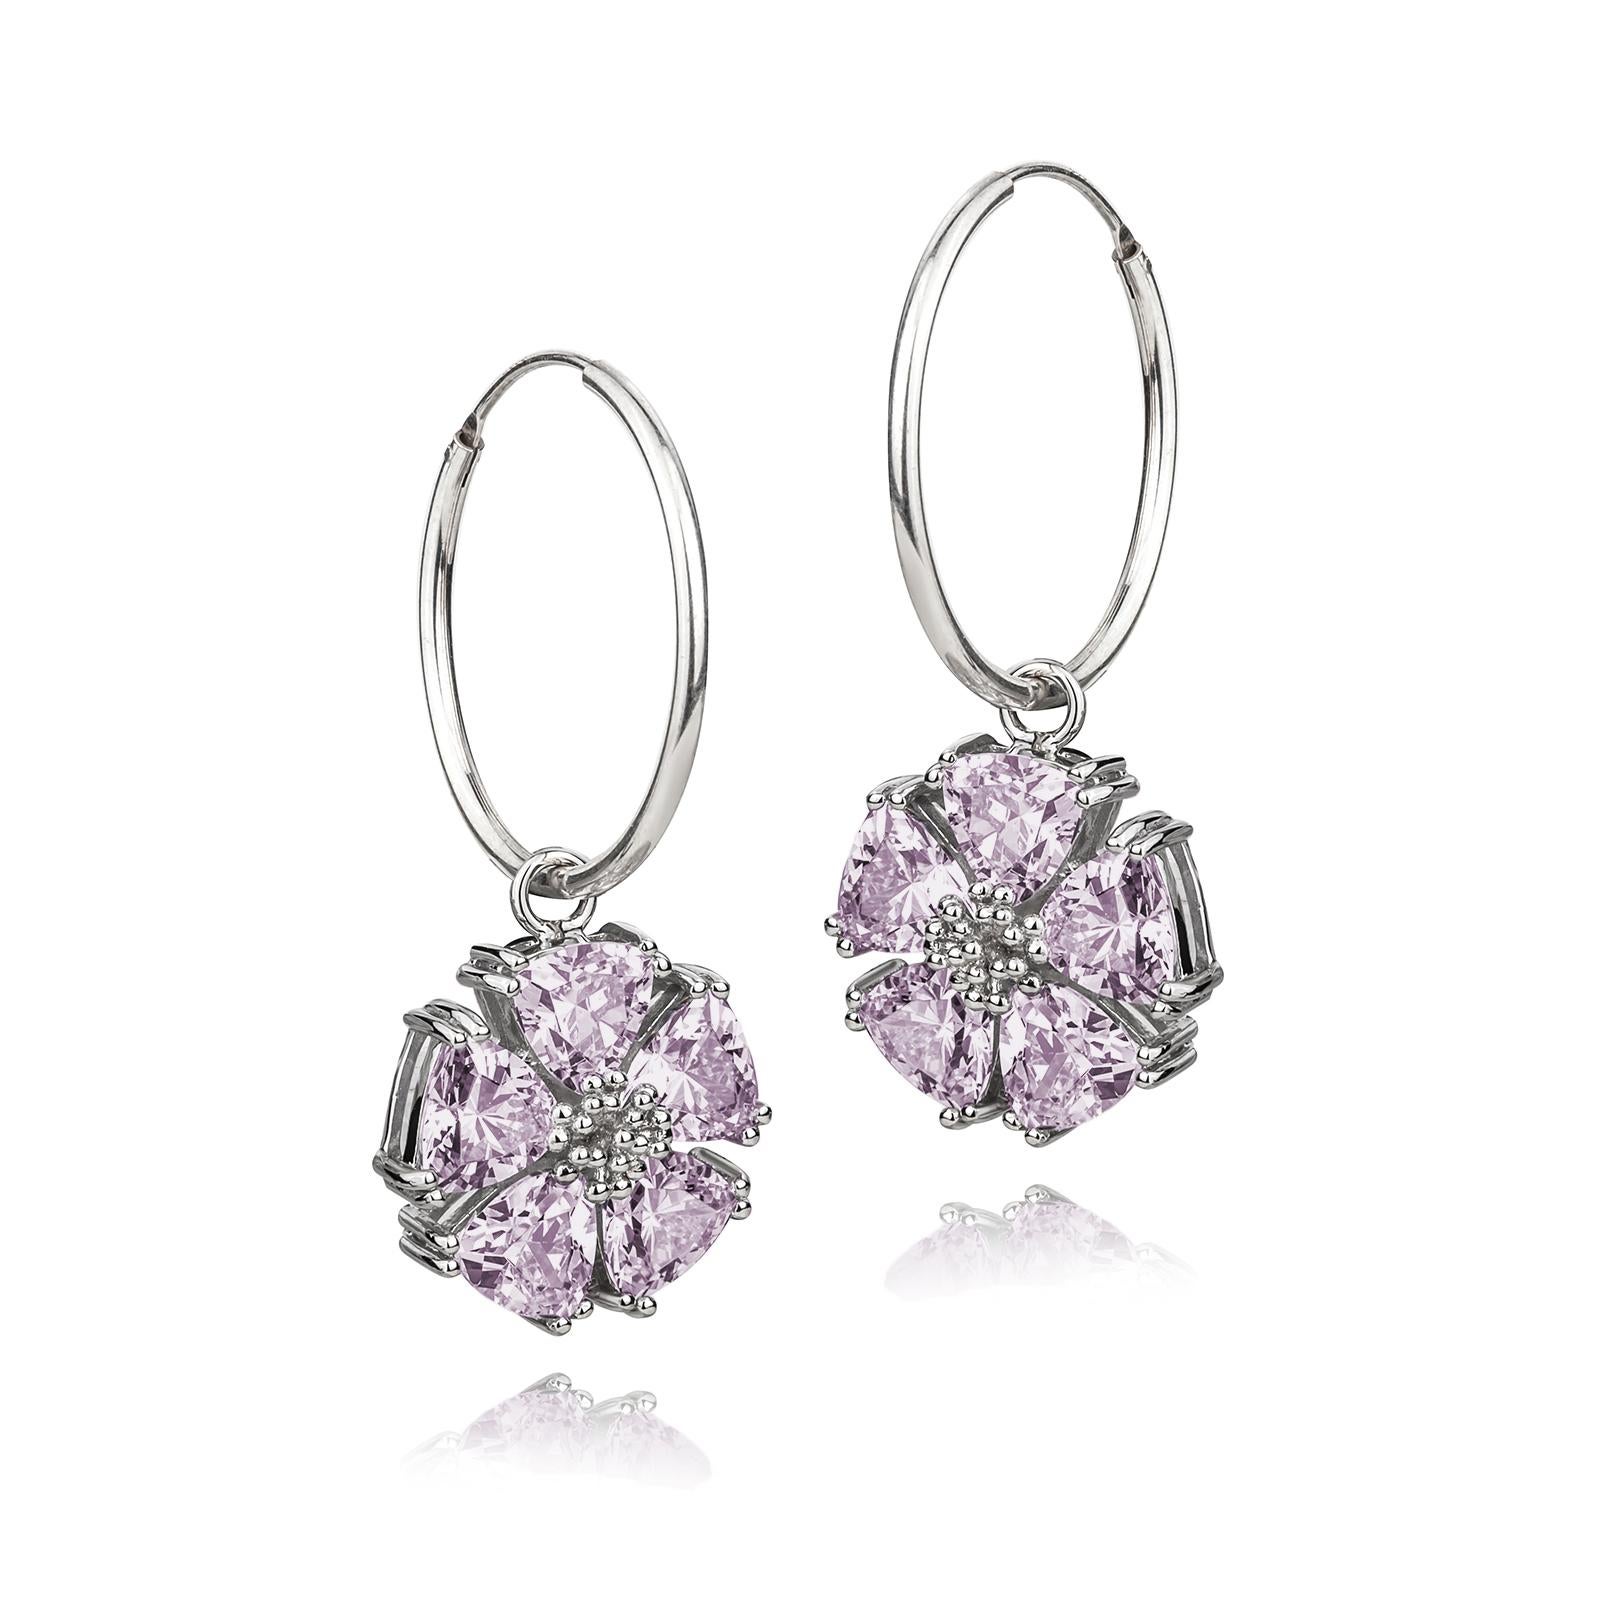 Designed in NYC

.925 Sterling Silver 10 x 7 mm Amethyst Blossom Stone Dangle Hoops. No matter the season, allow natural beauty to surround you wherever you go. Blossom stone dangle hoops: 

	Sterling silver 
	High-polish finish
	Light-weight